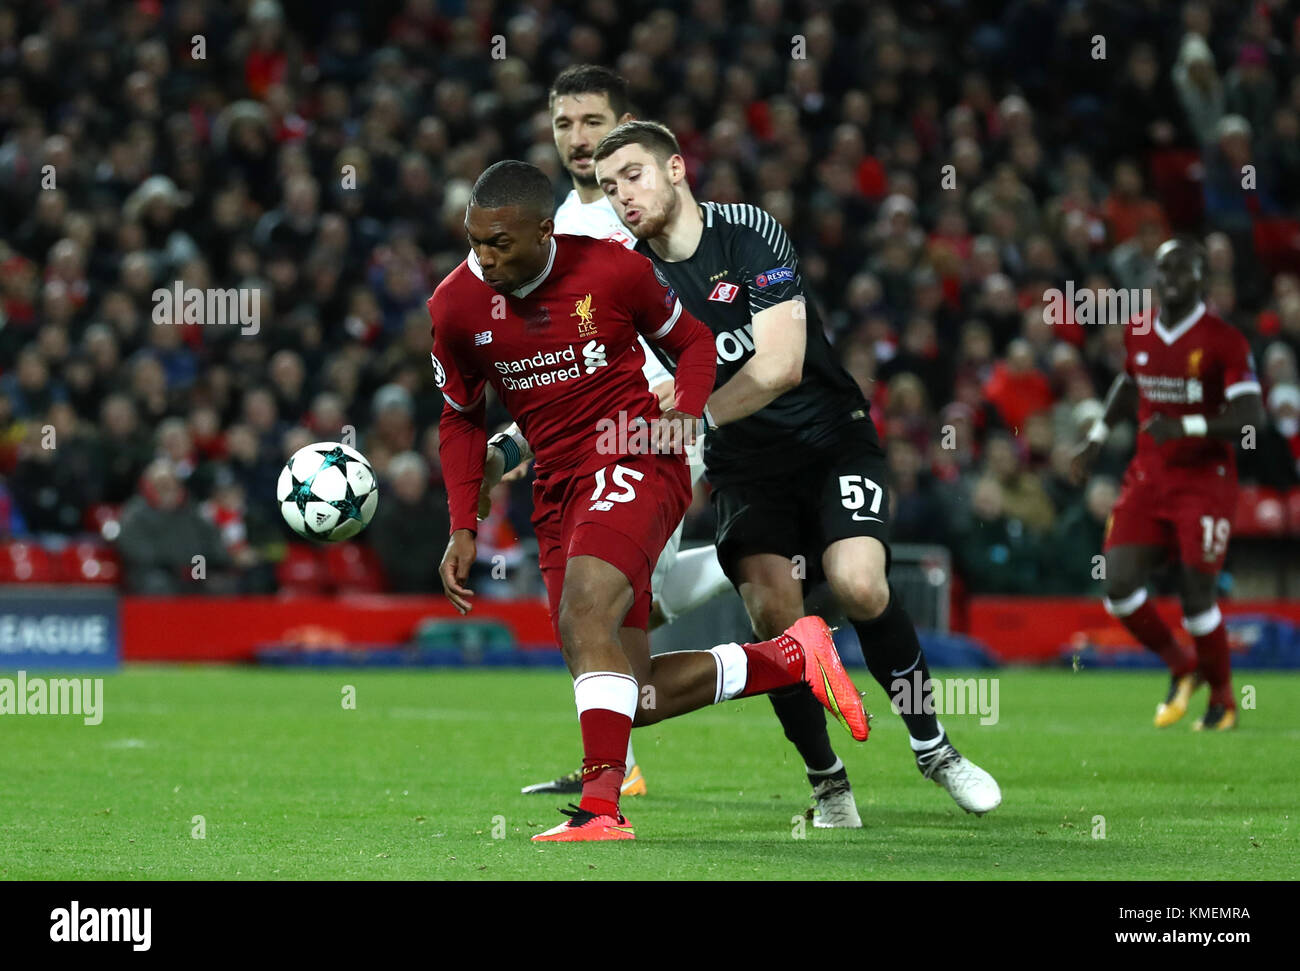 Liverpool's Daniel Sturridge (left) battles for the ball with Spartak Moscow's Alexander Selikhov during the UEFA Champions League, Group E match at Anfield, Liverpool. Stock Photo